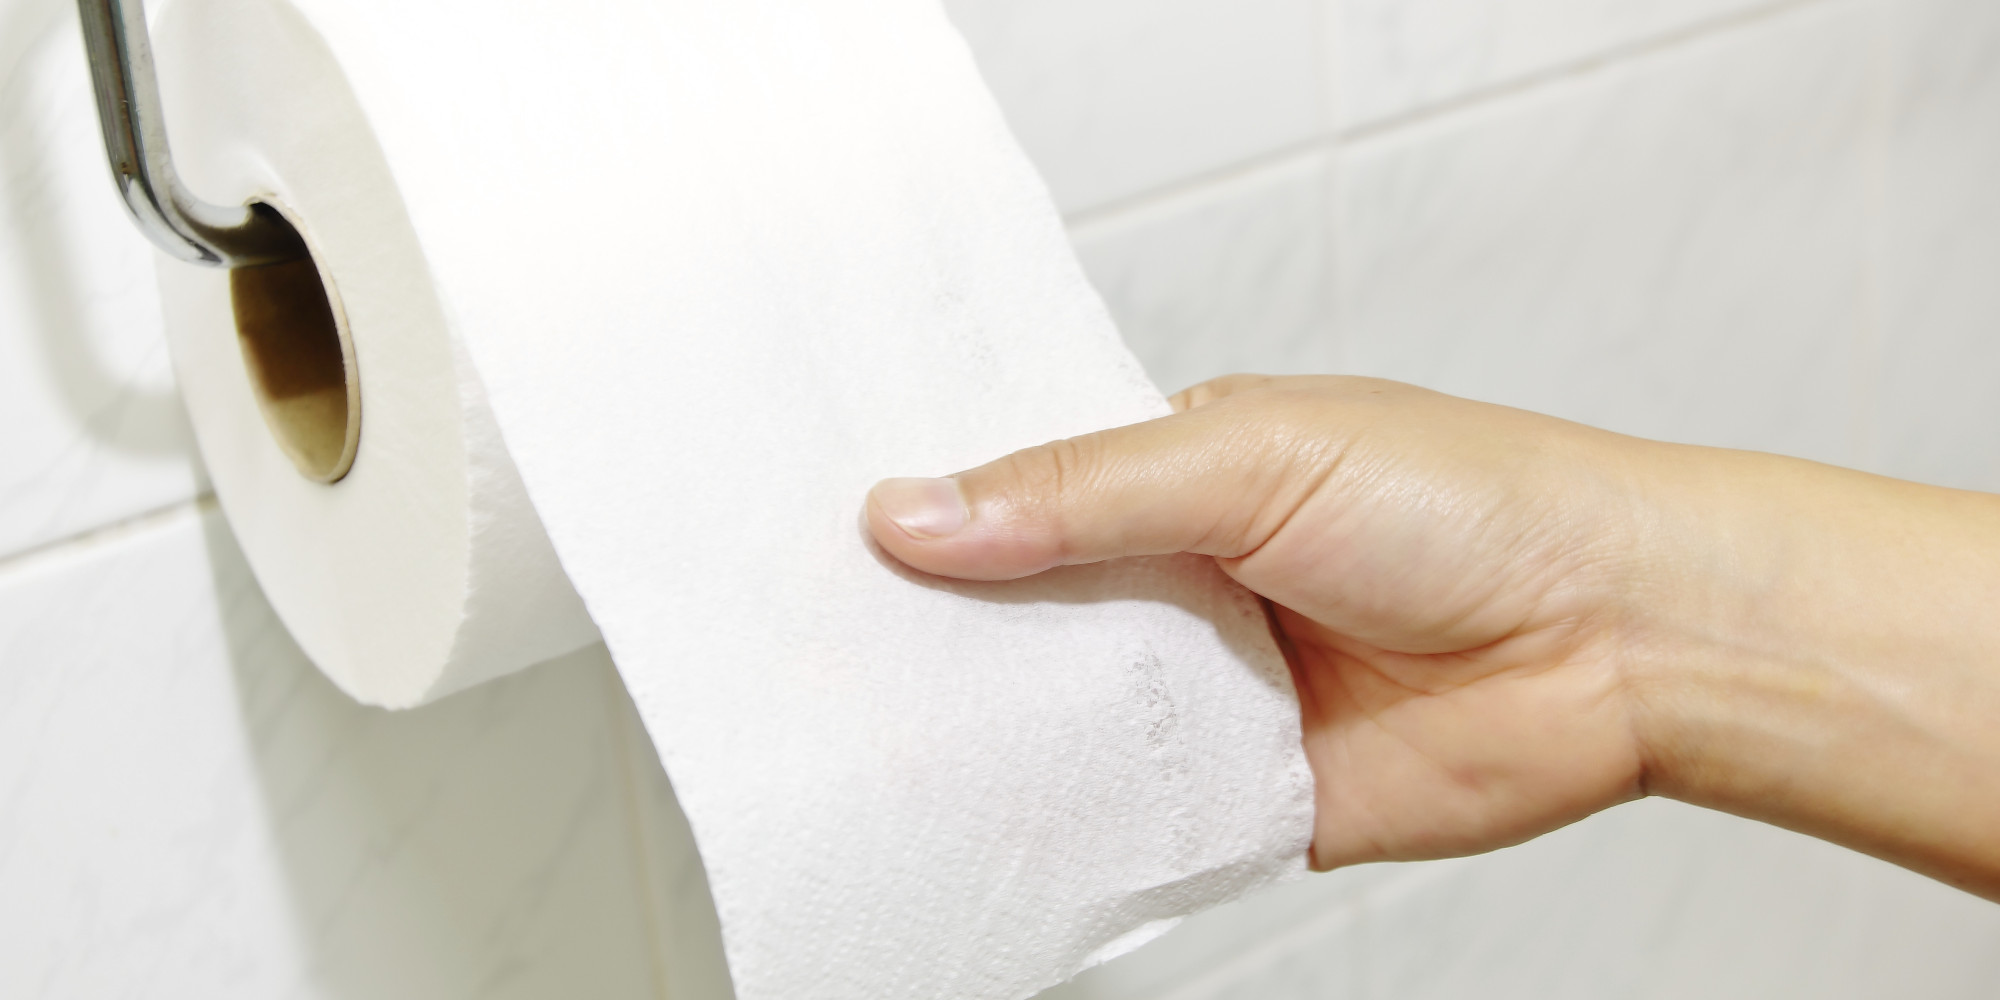 Is it haram to use toilet paper?